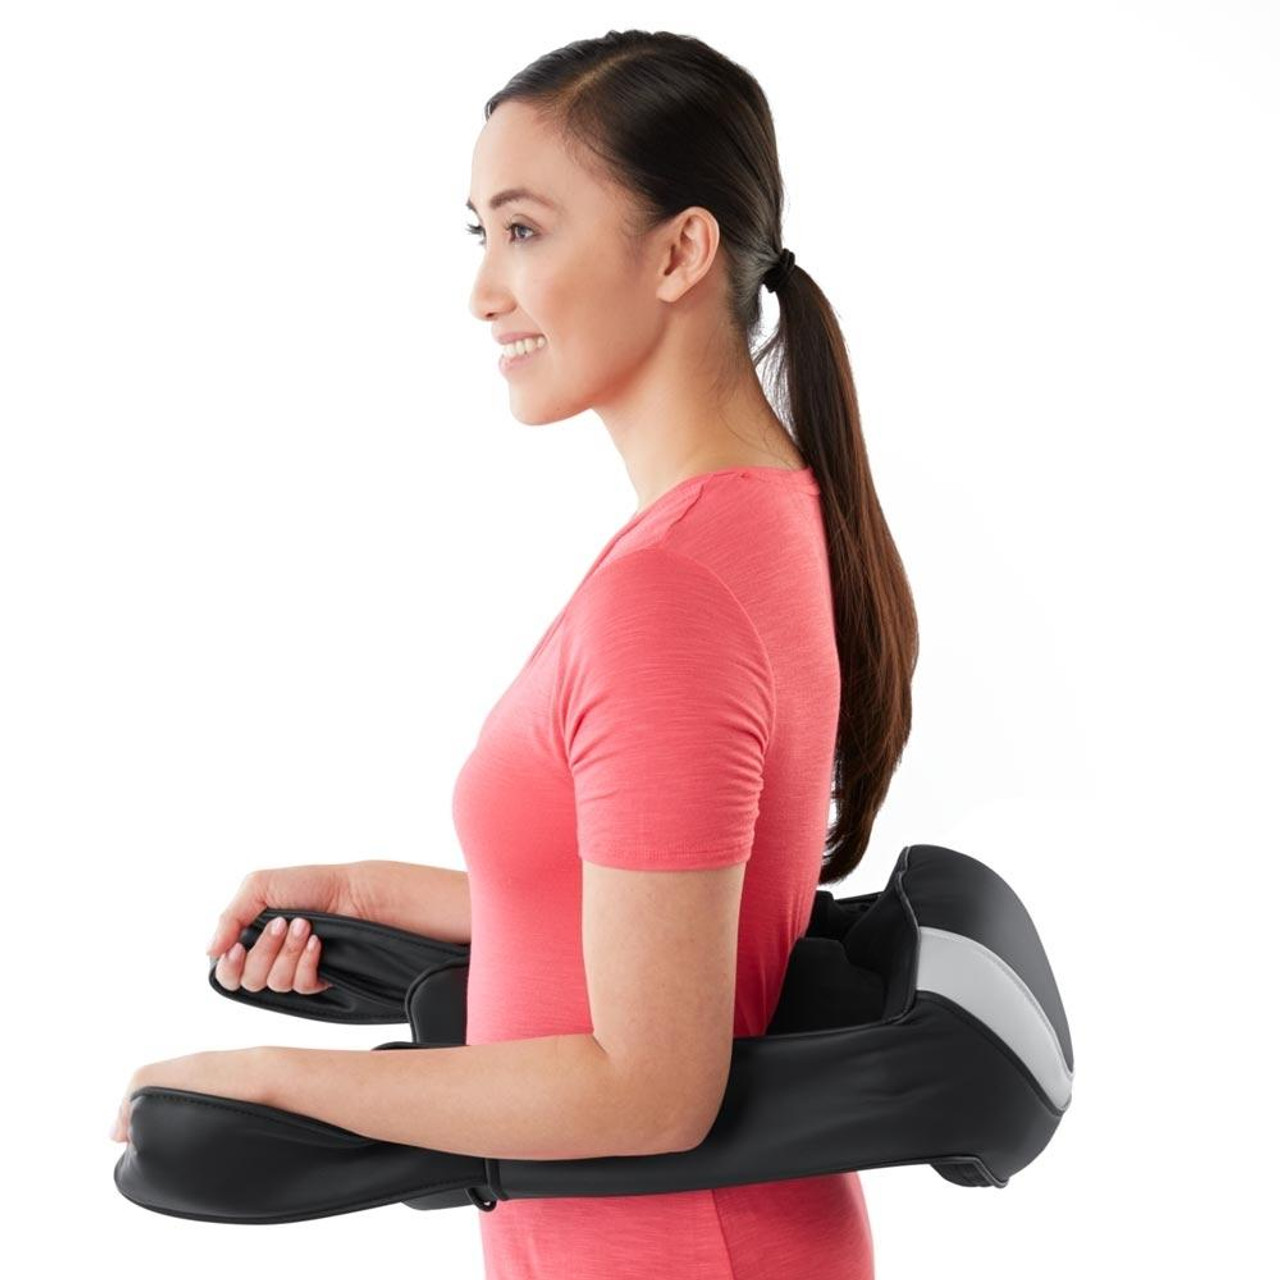 GDFIH Back Massager; Massage And Health Care Appliance - Ordinary 